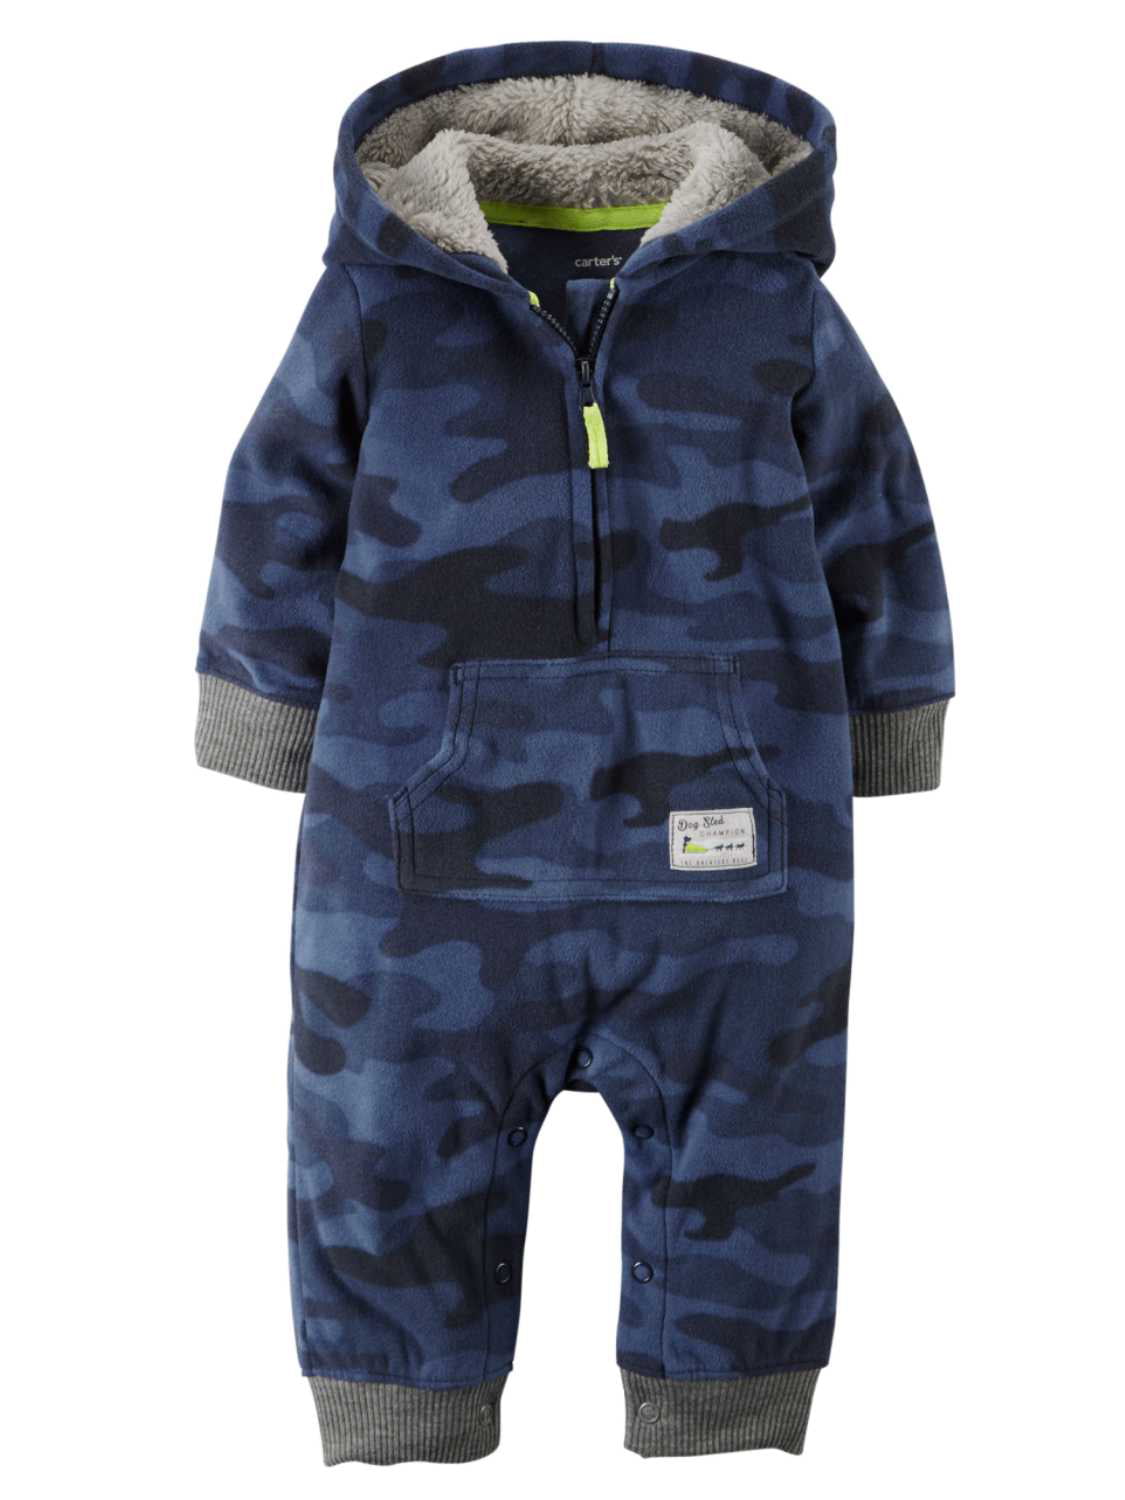 Carter's Carters Infant Boy Blue Camo Hooded Fleece Jumpsuit Coverall Outfit 3m